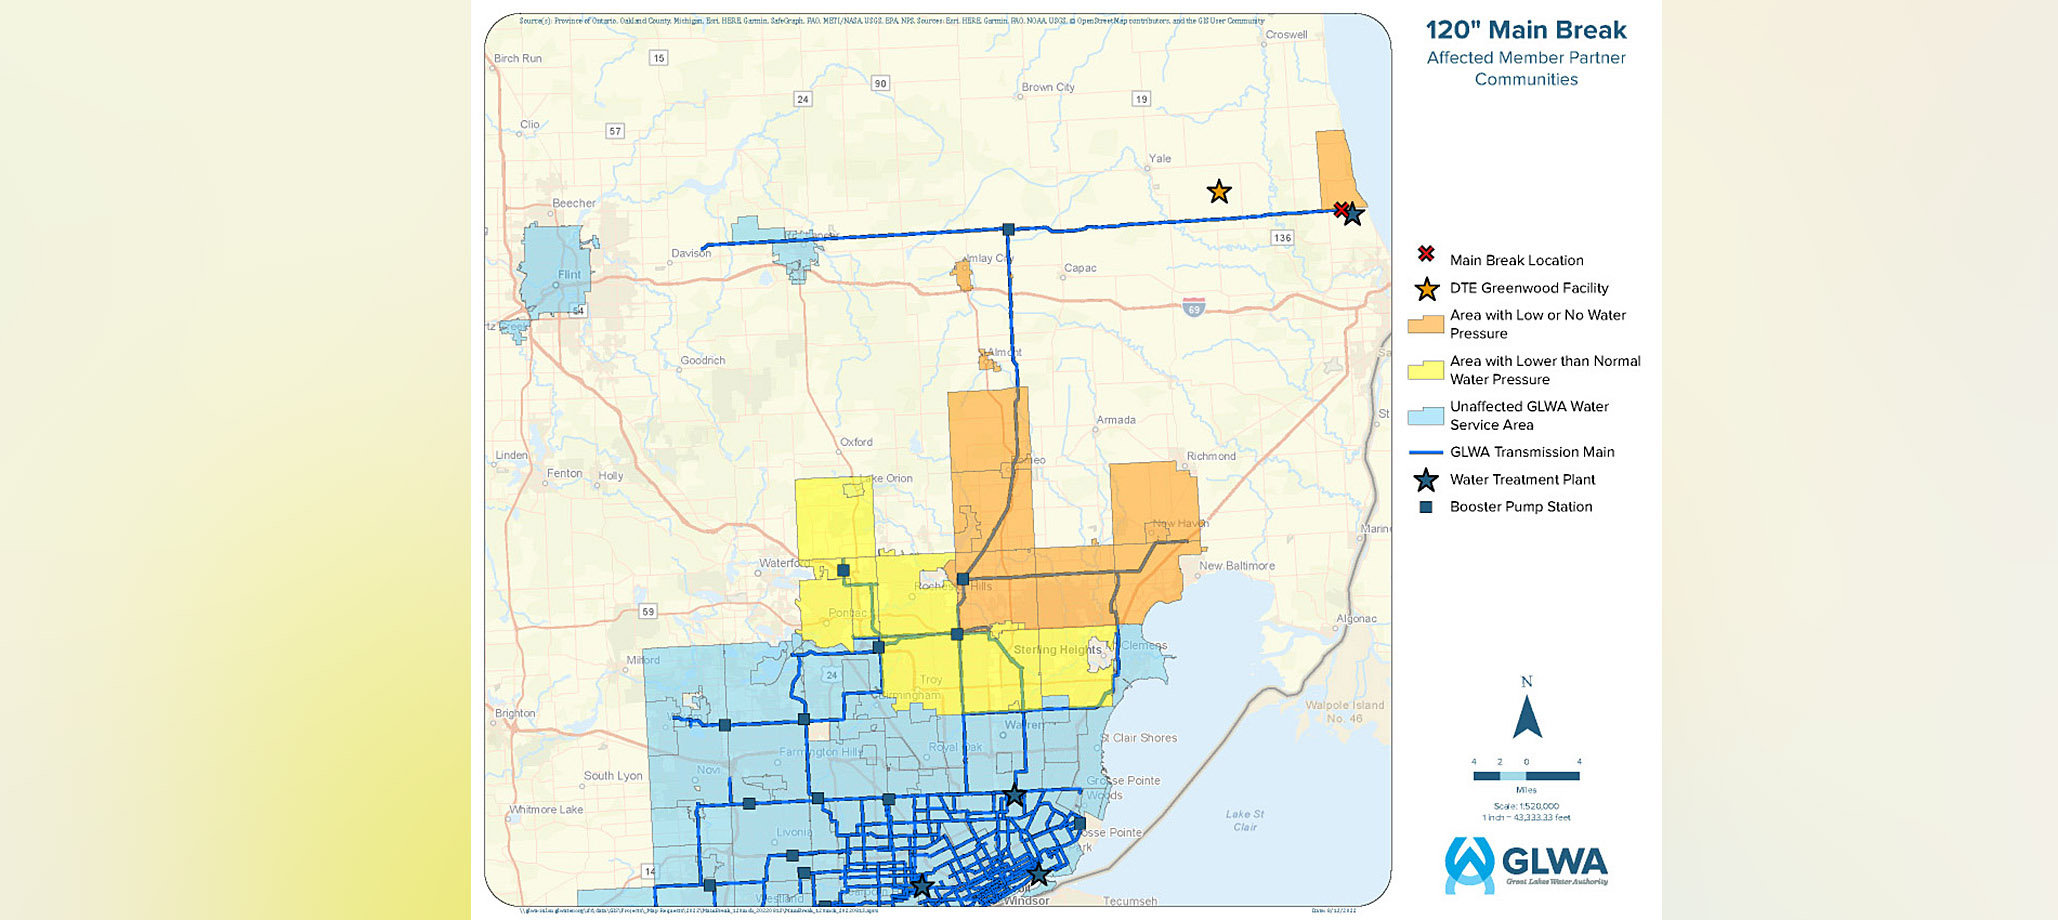 PHOTO: A graphic released by the Great Lakes Water Authority (GLWA) shows areas affected by a leak on a 120-inch water main. The affected water transmission main distributes drinking water to communities in the northern part of GLWA’s service area.